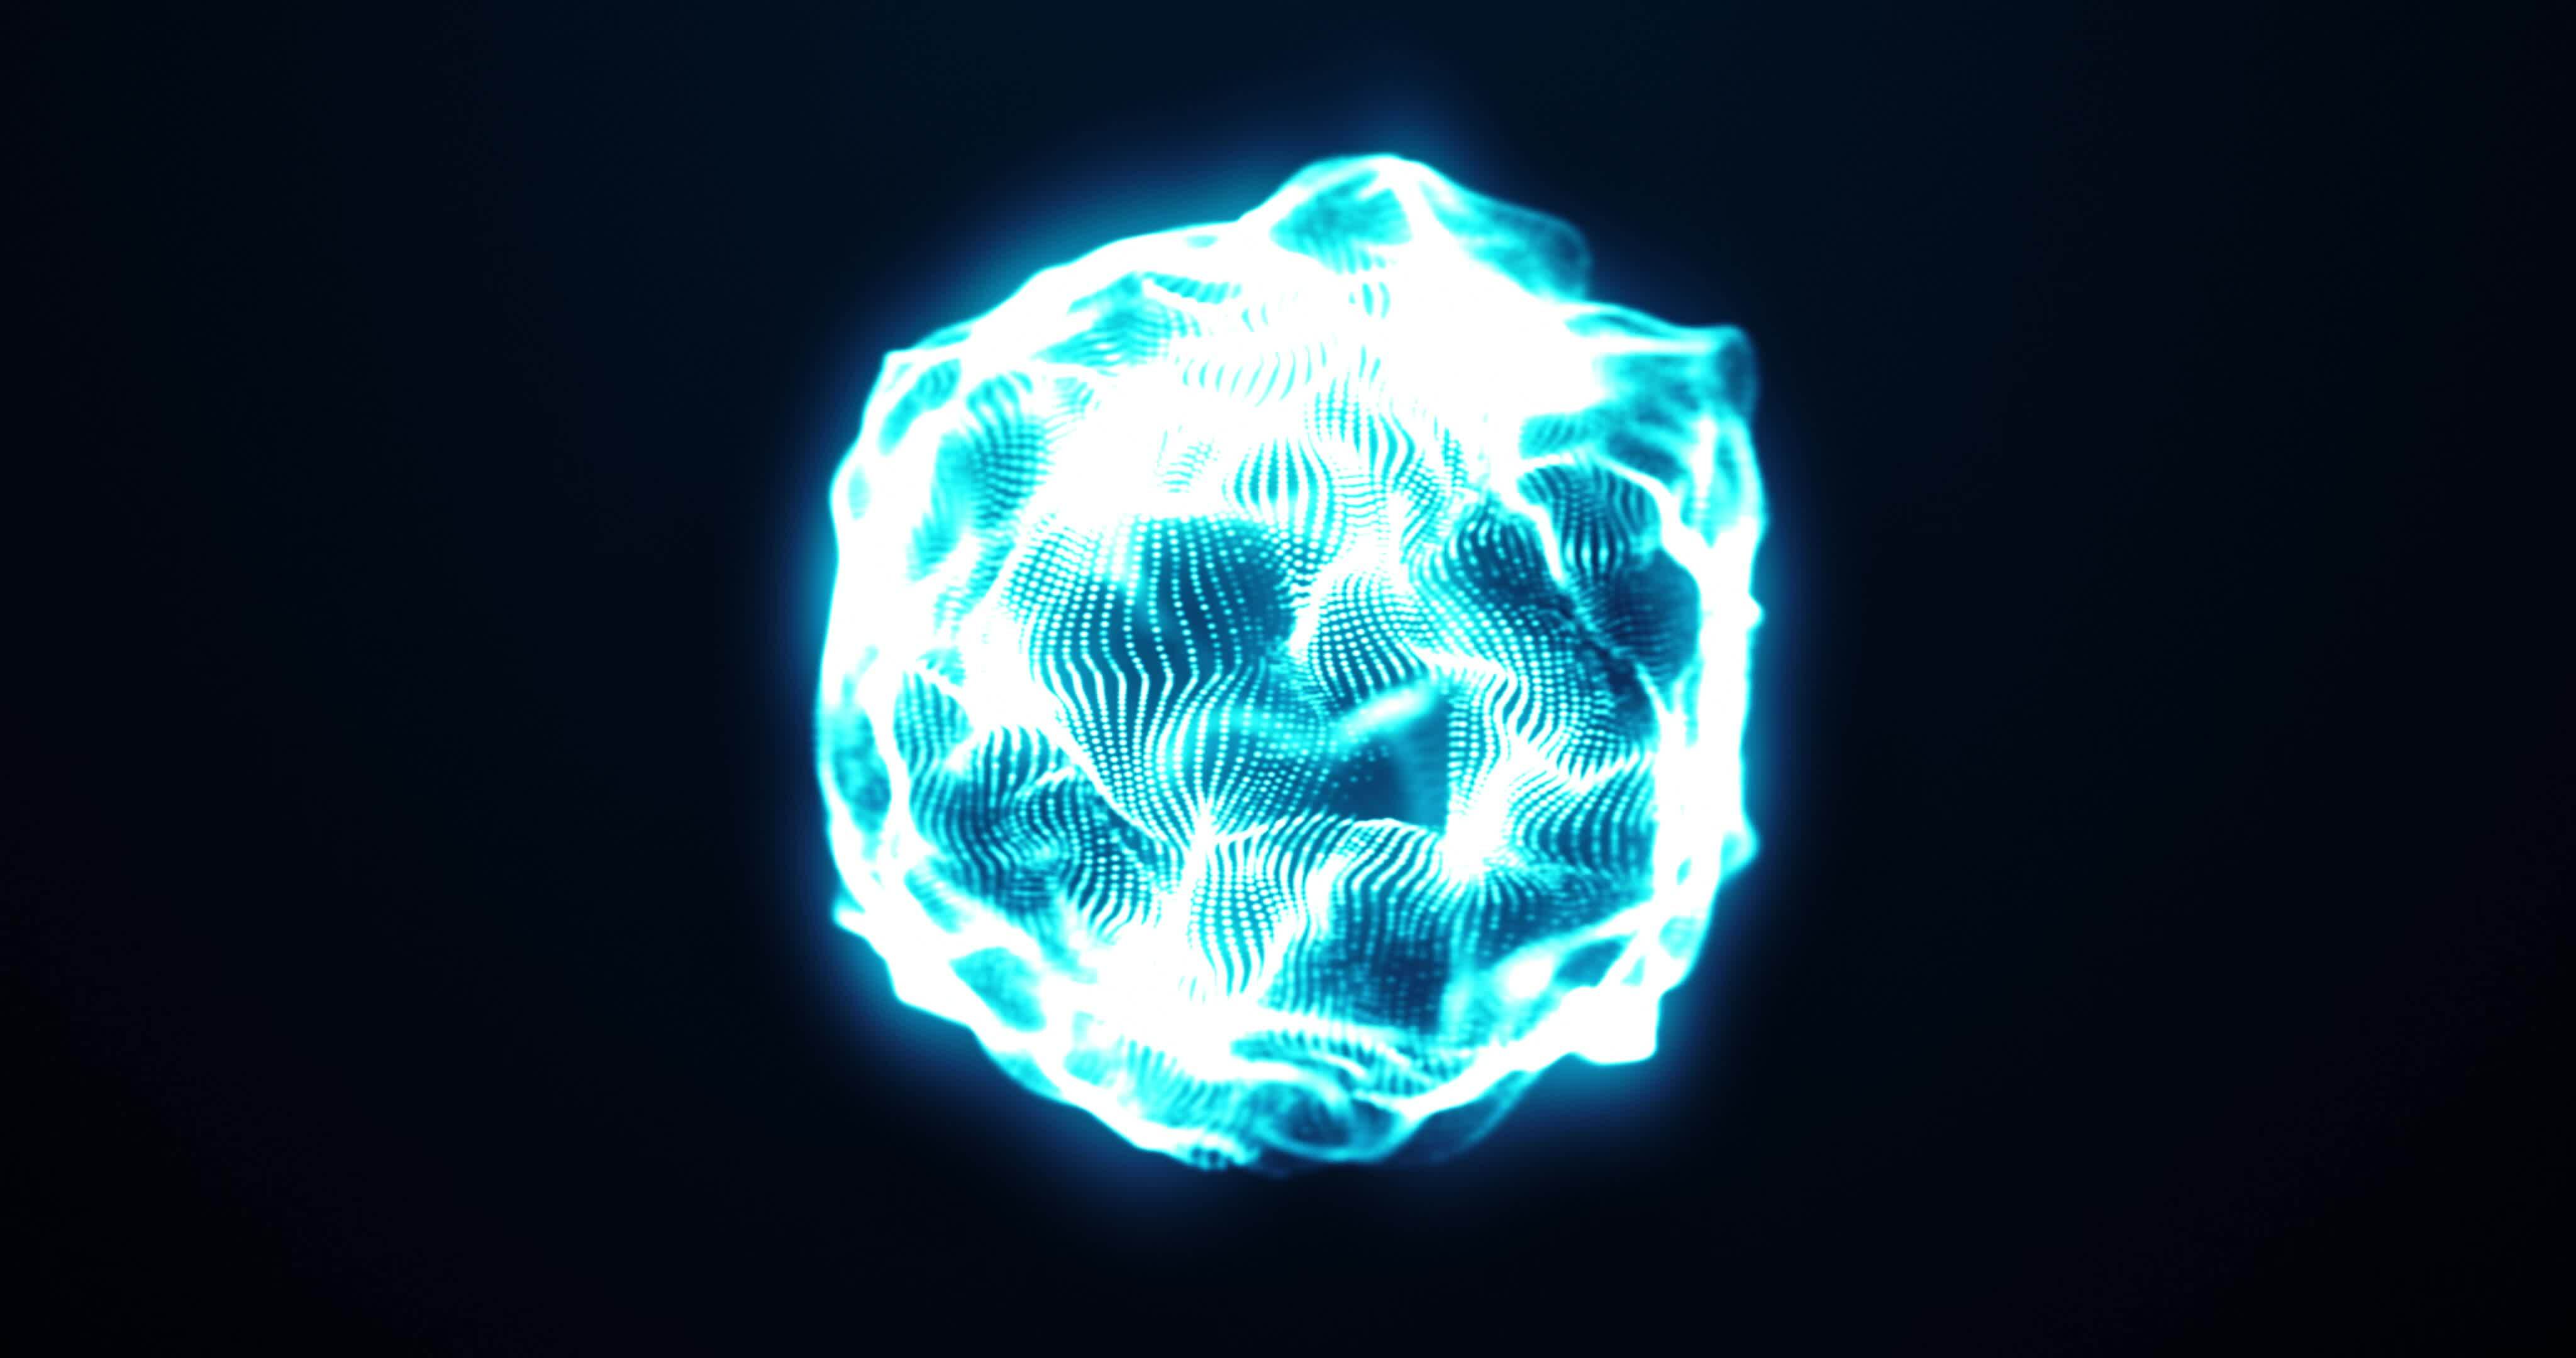 GLUE-VFX-Visual-Effects-HDRI-Sphere-Ball - 3D Animation, Motion Graphics, Video Production